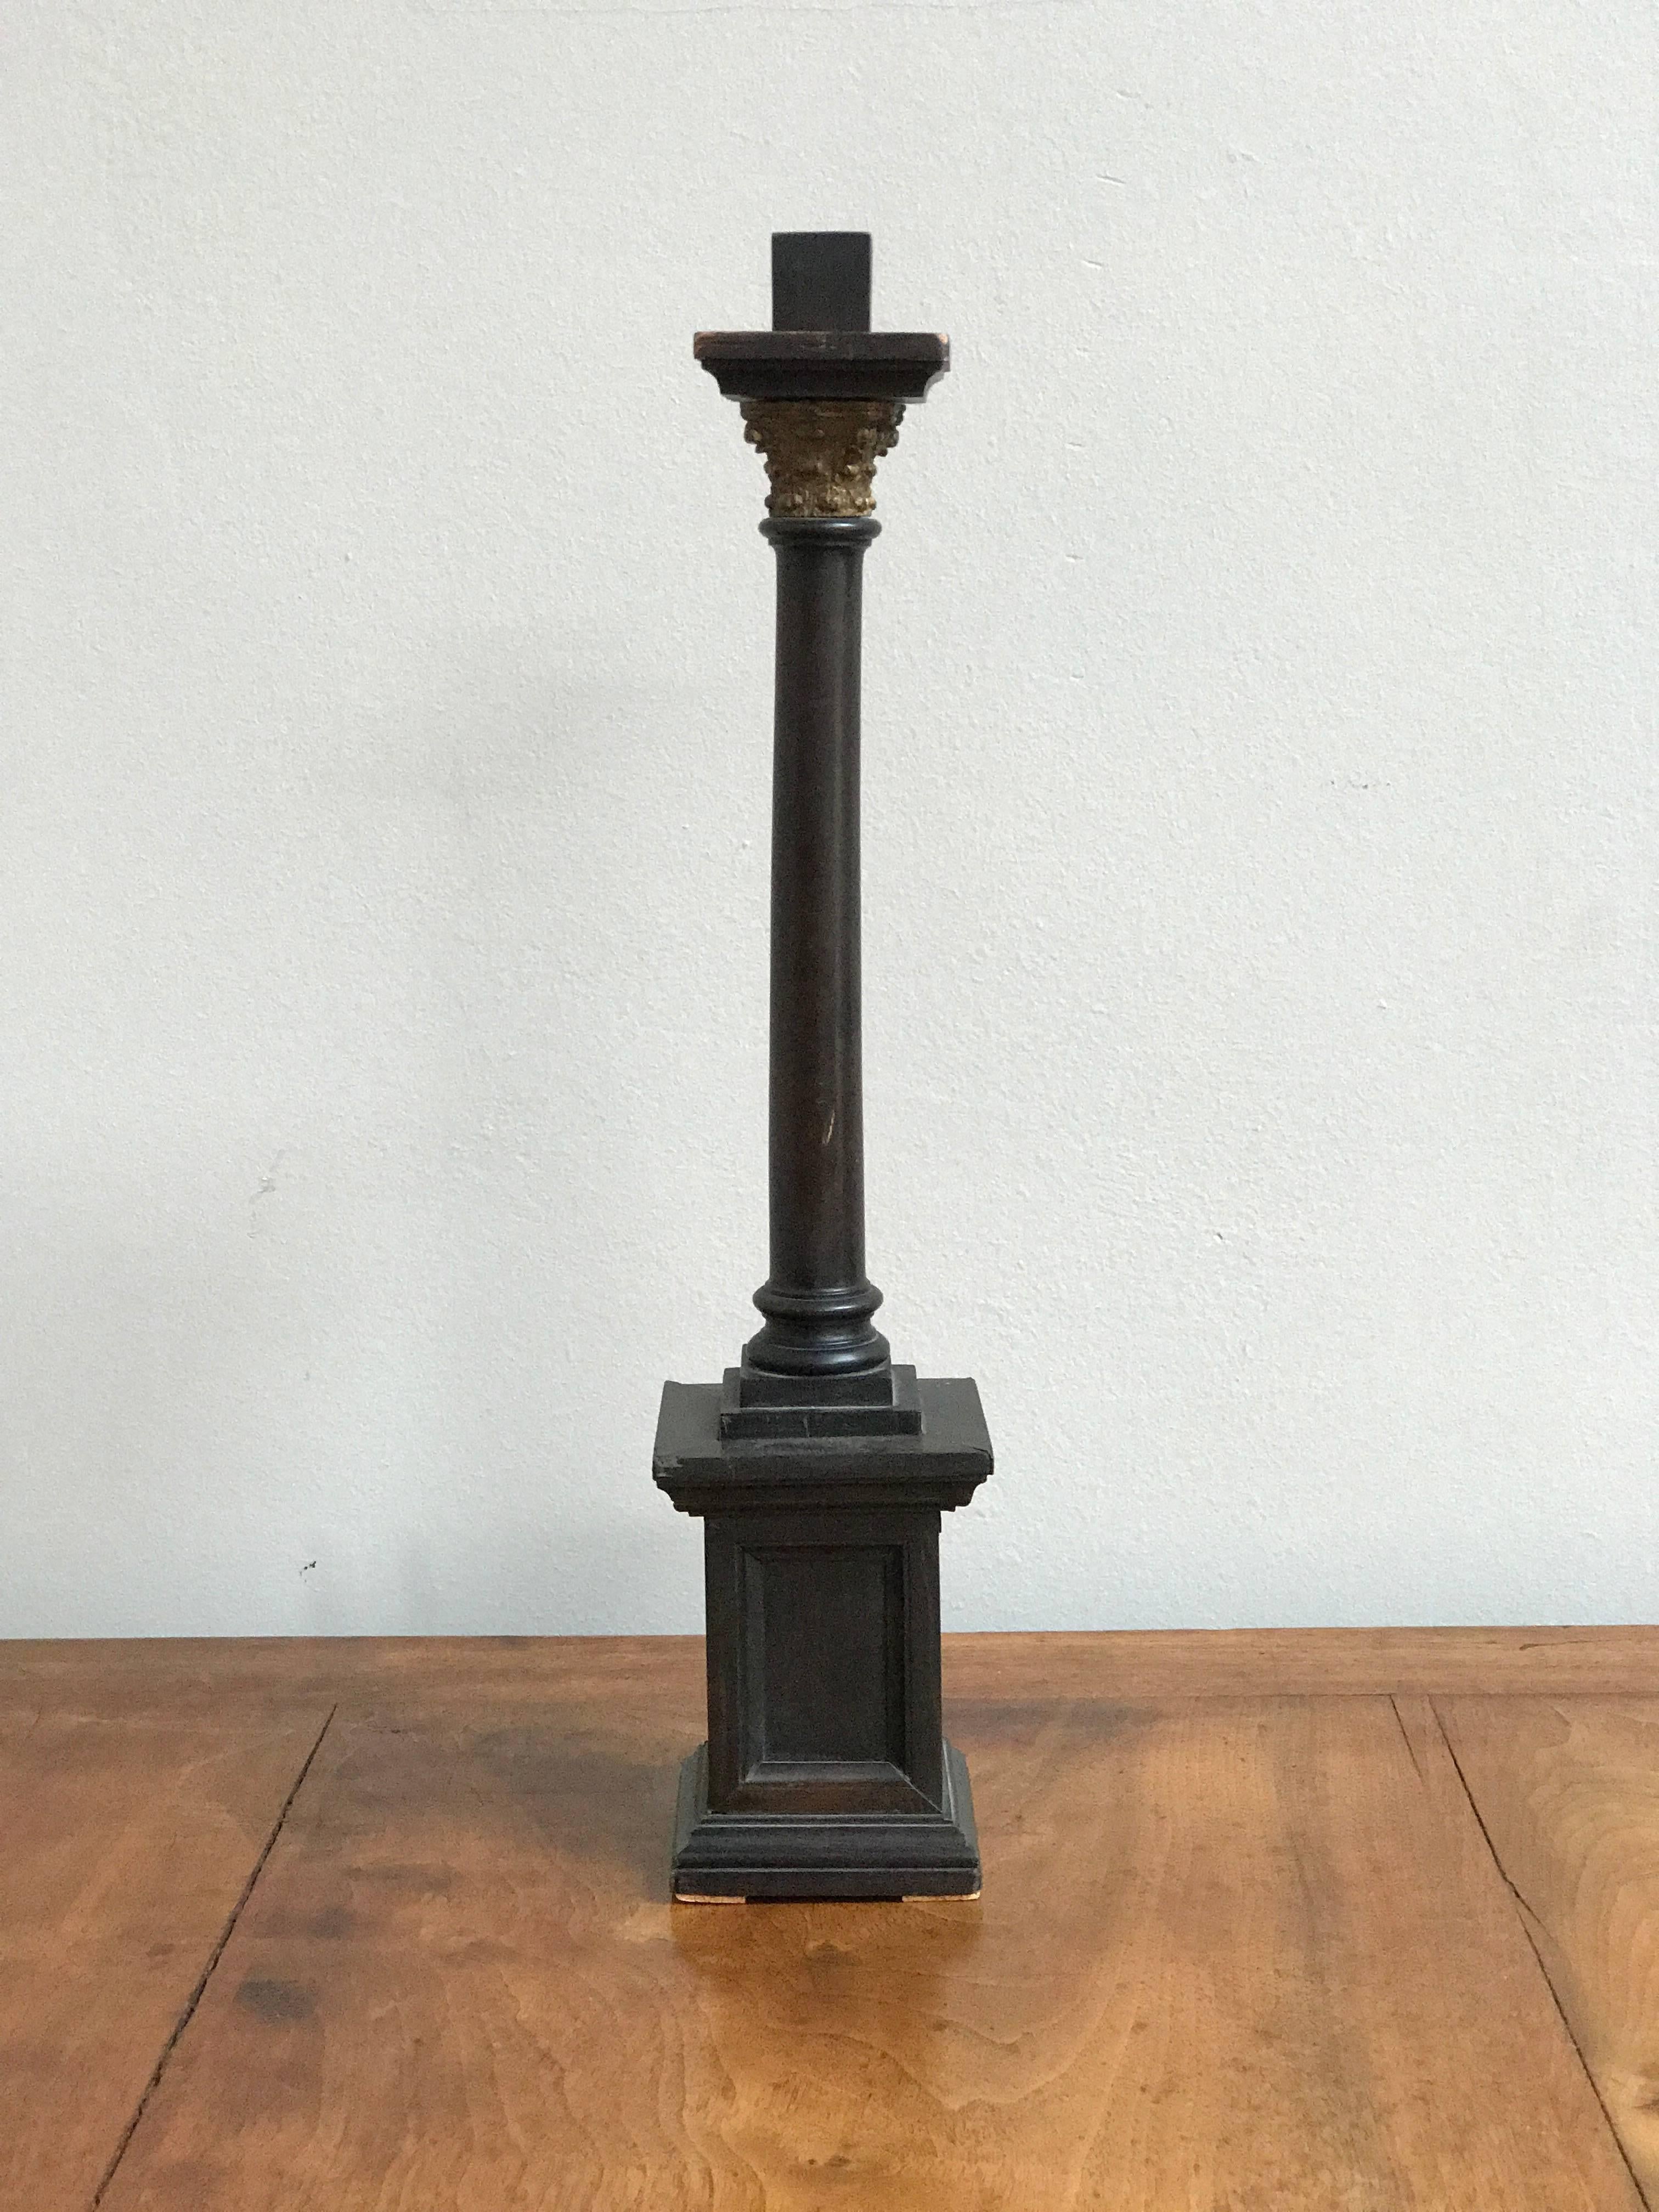 Late 19th century wooden column model from France. 